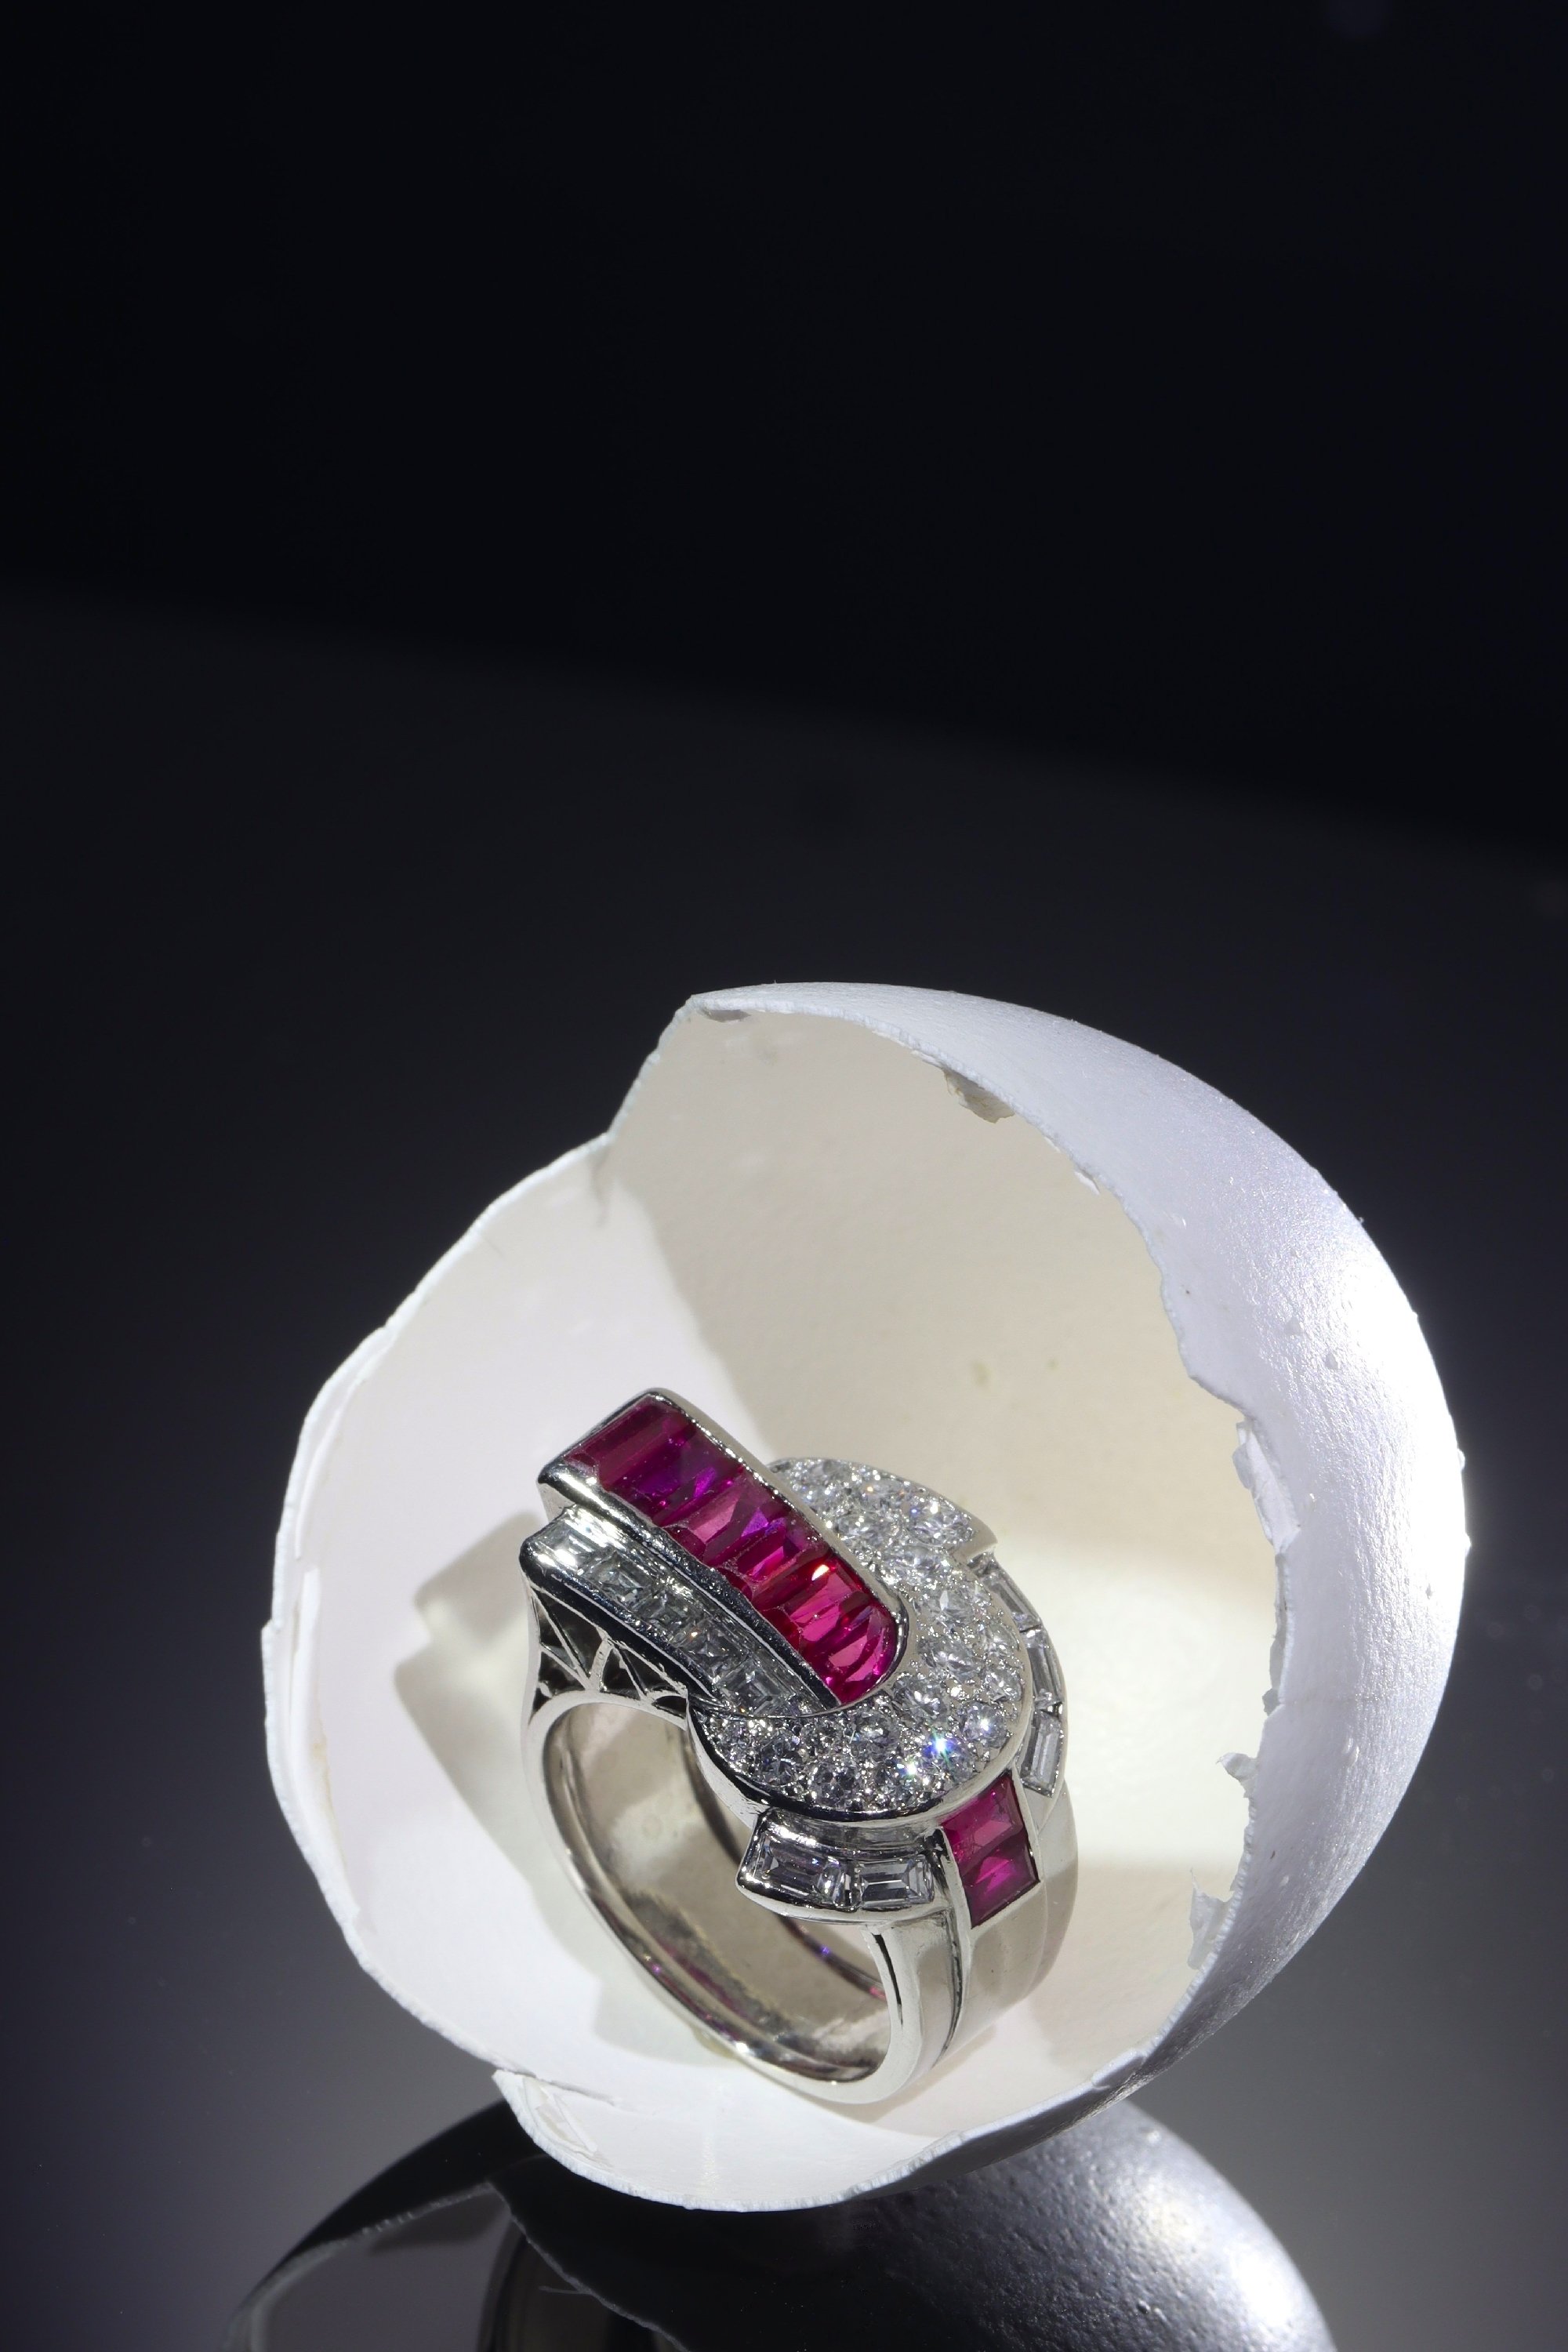 Click the picture to see this Vintage Fifties Retro platinum diamond and ruby ring